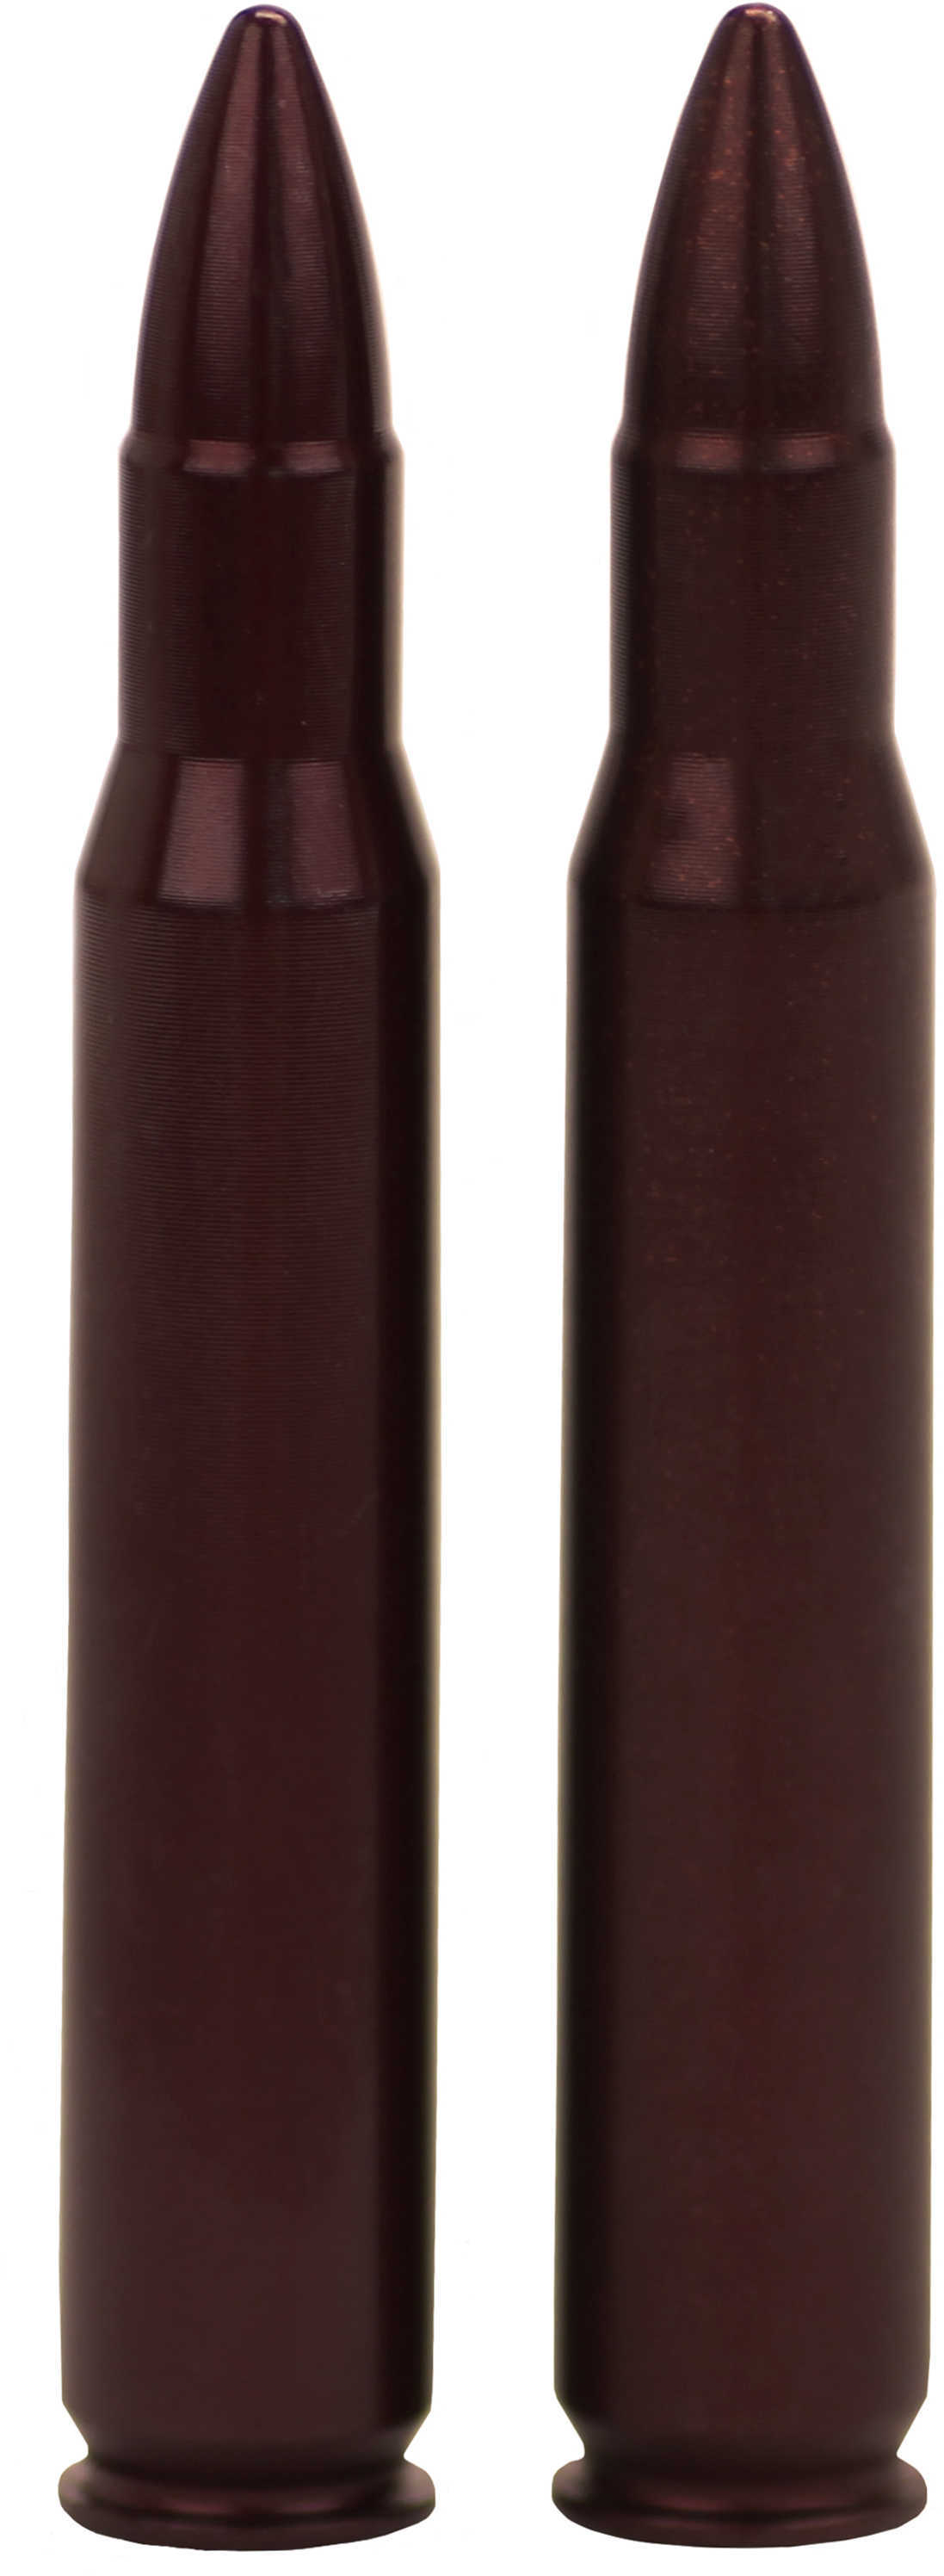 Pachmayr Azoom 30-06 Springfield Snap Caps 2 Pack Md: 12227